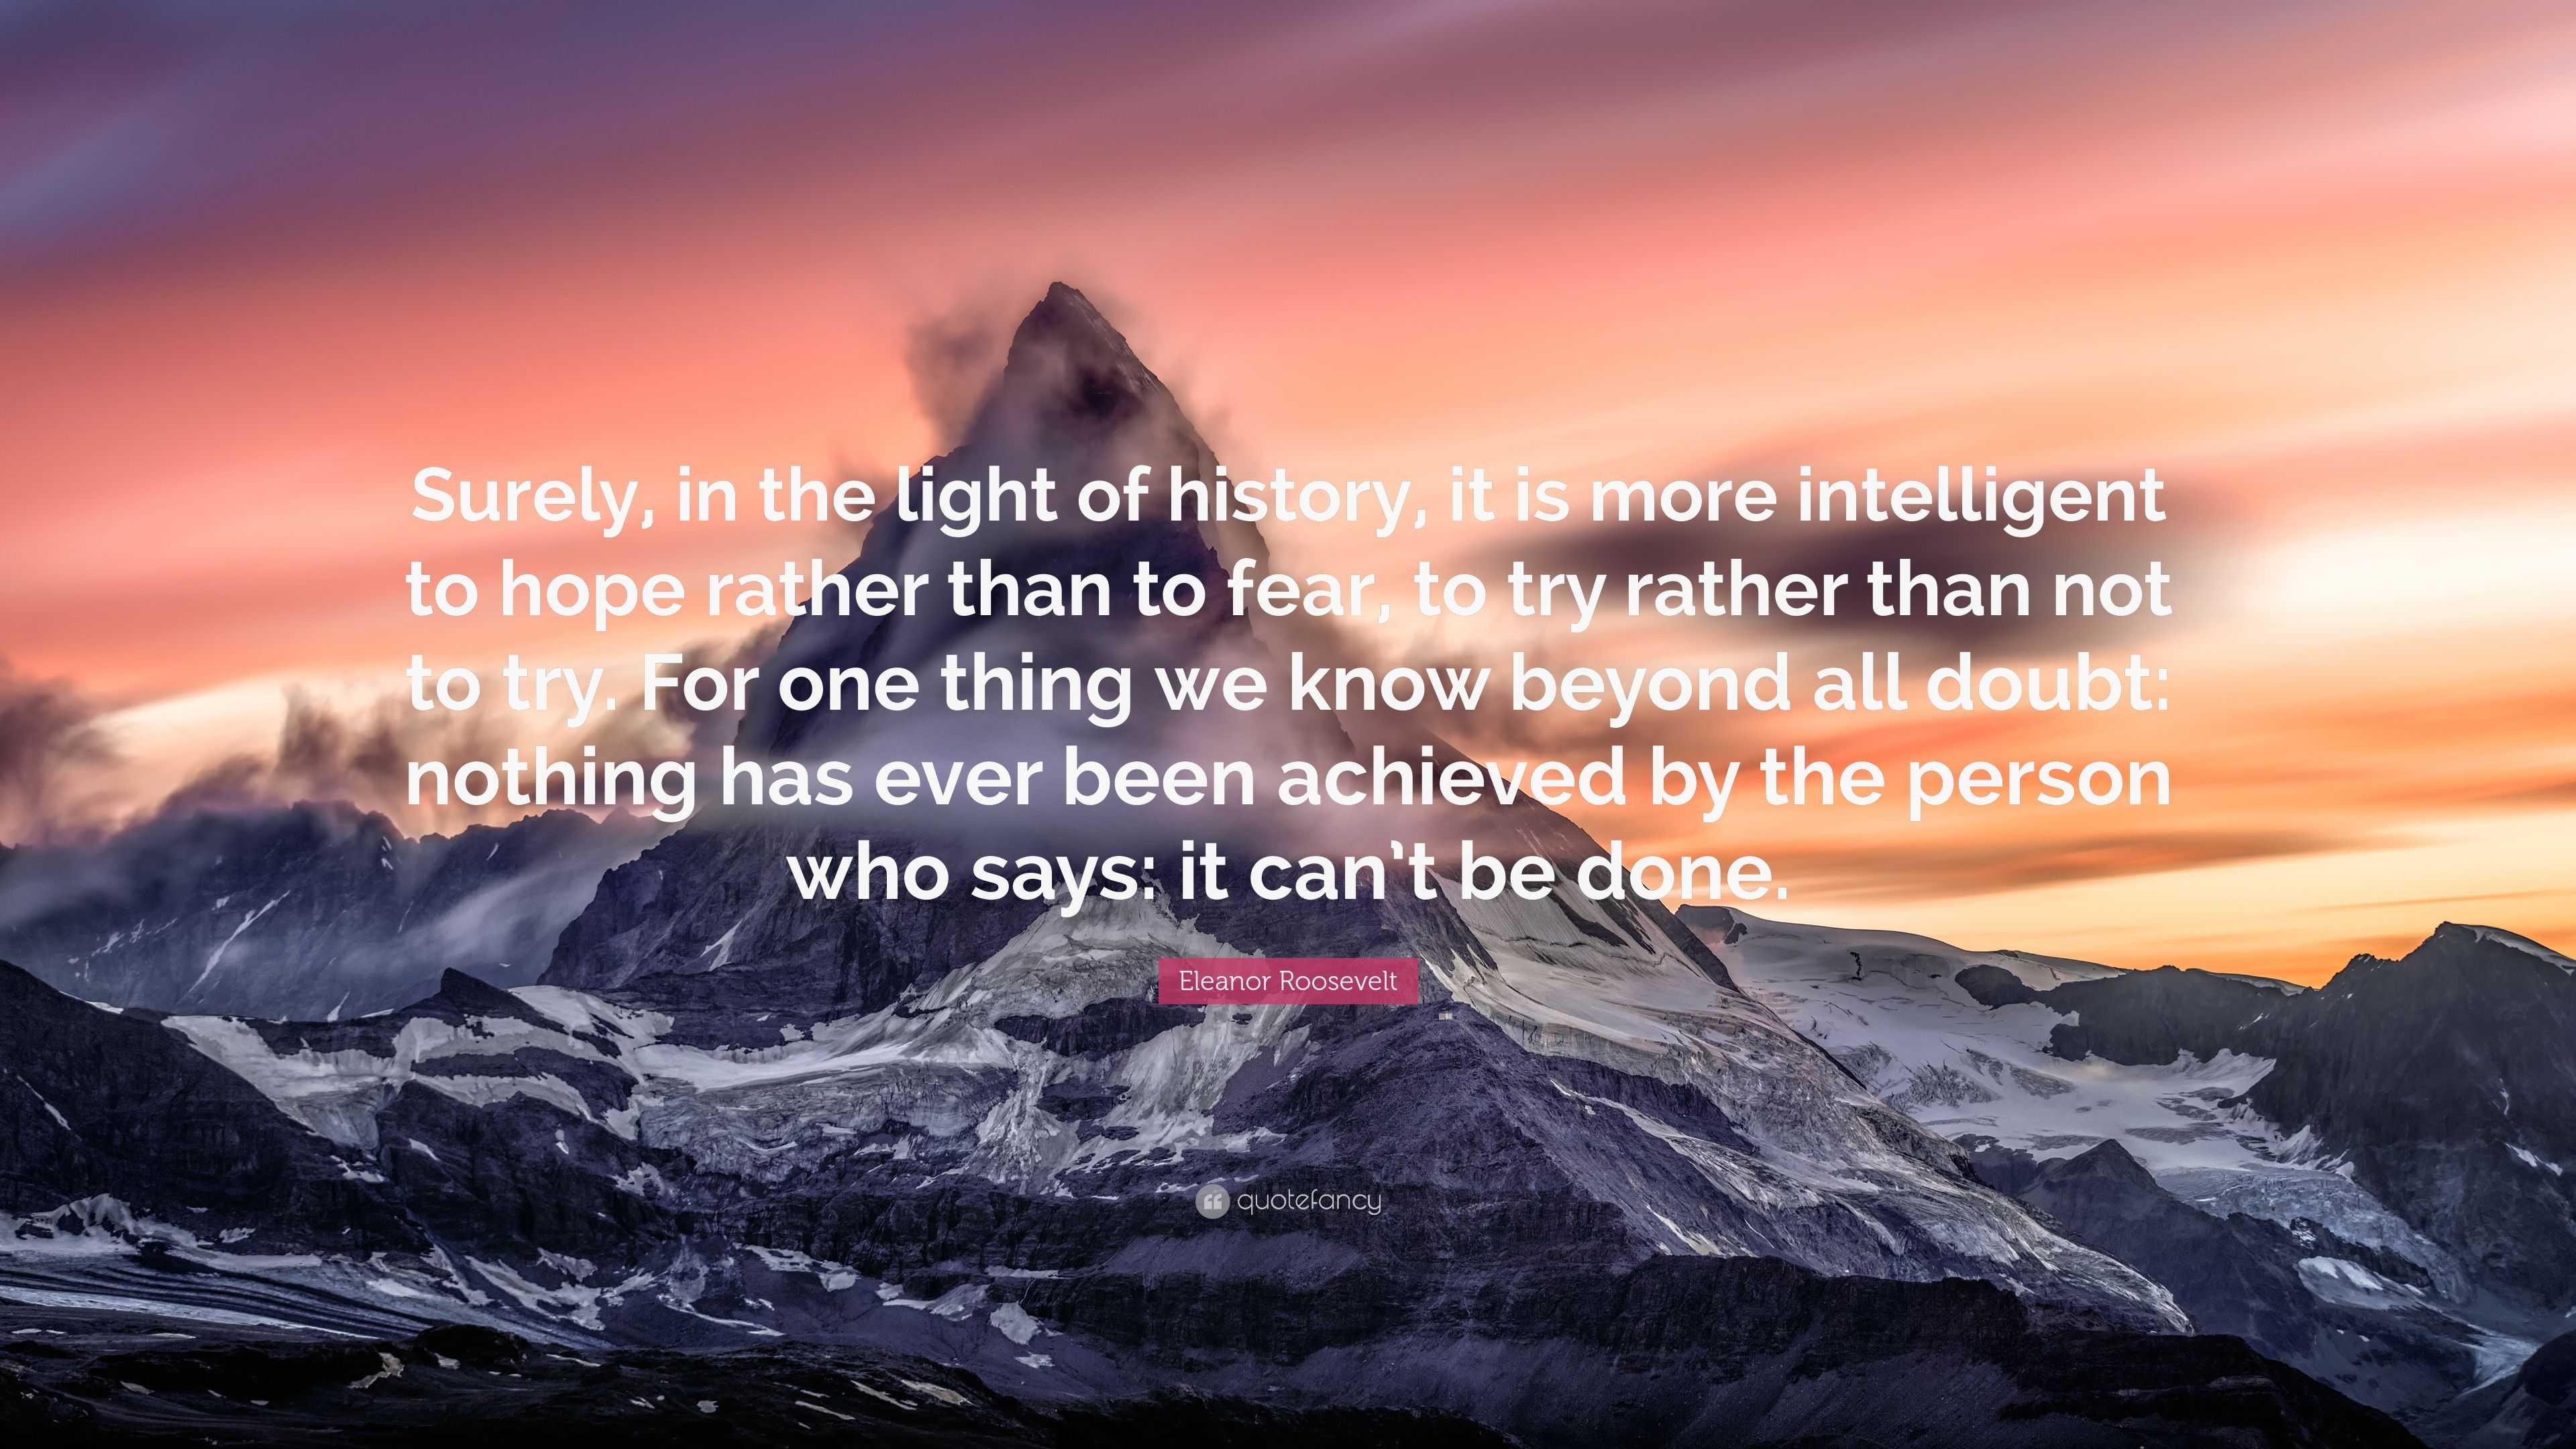 Eleanor Roosevelt Quote: “Surely, in the light of history, it is more ...